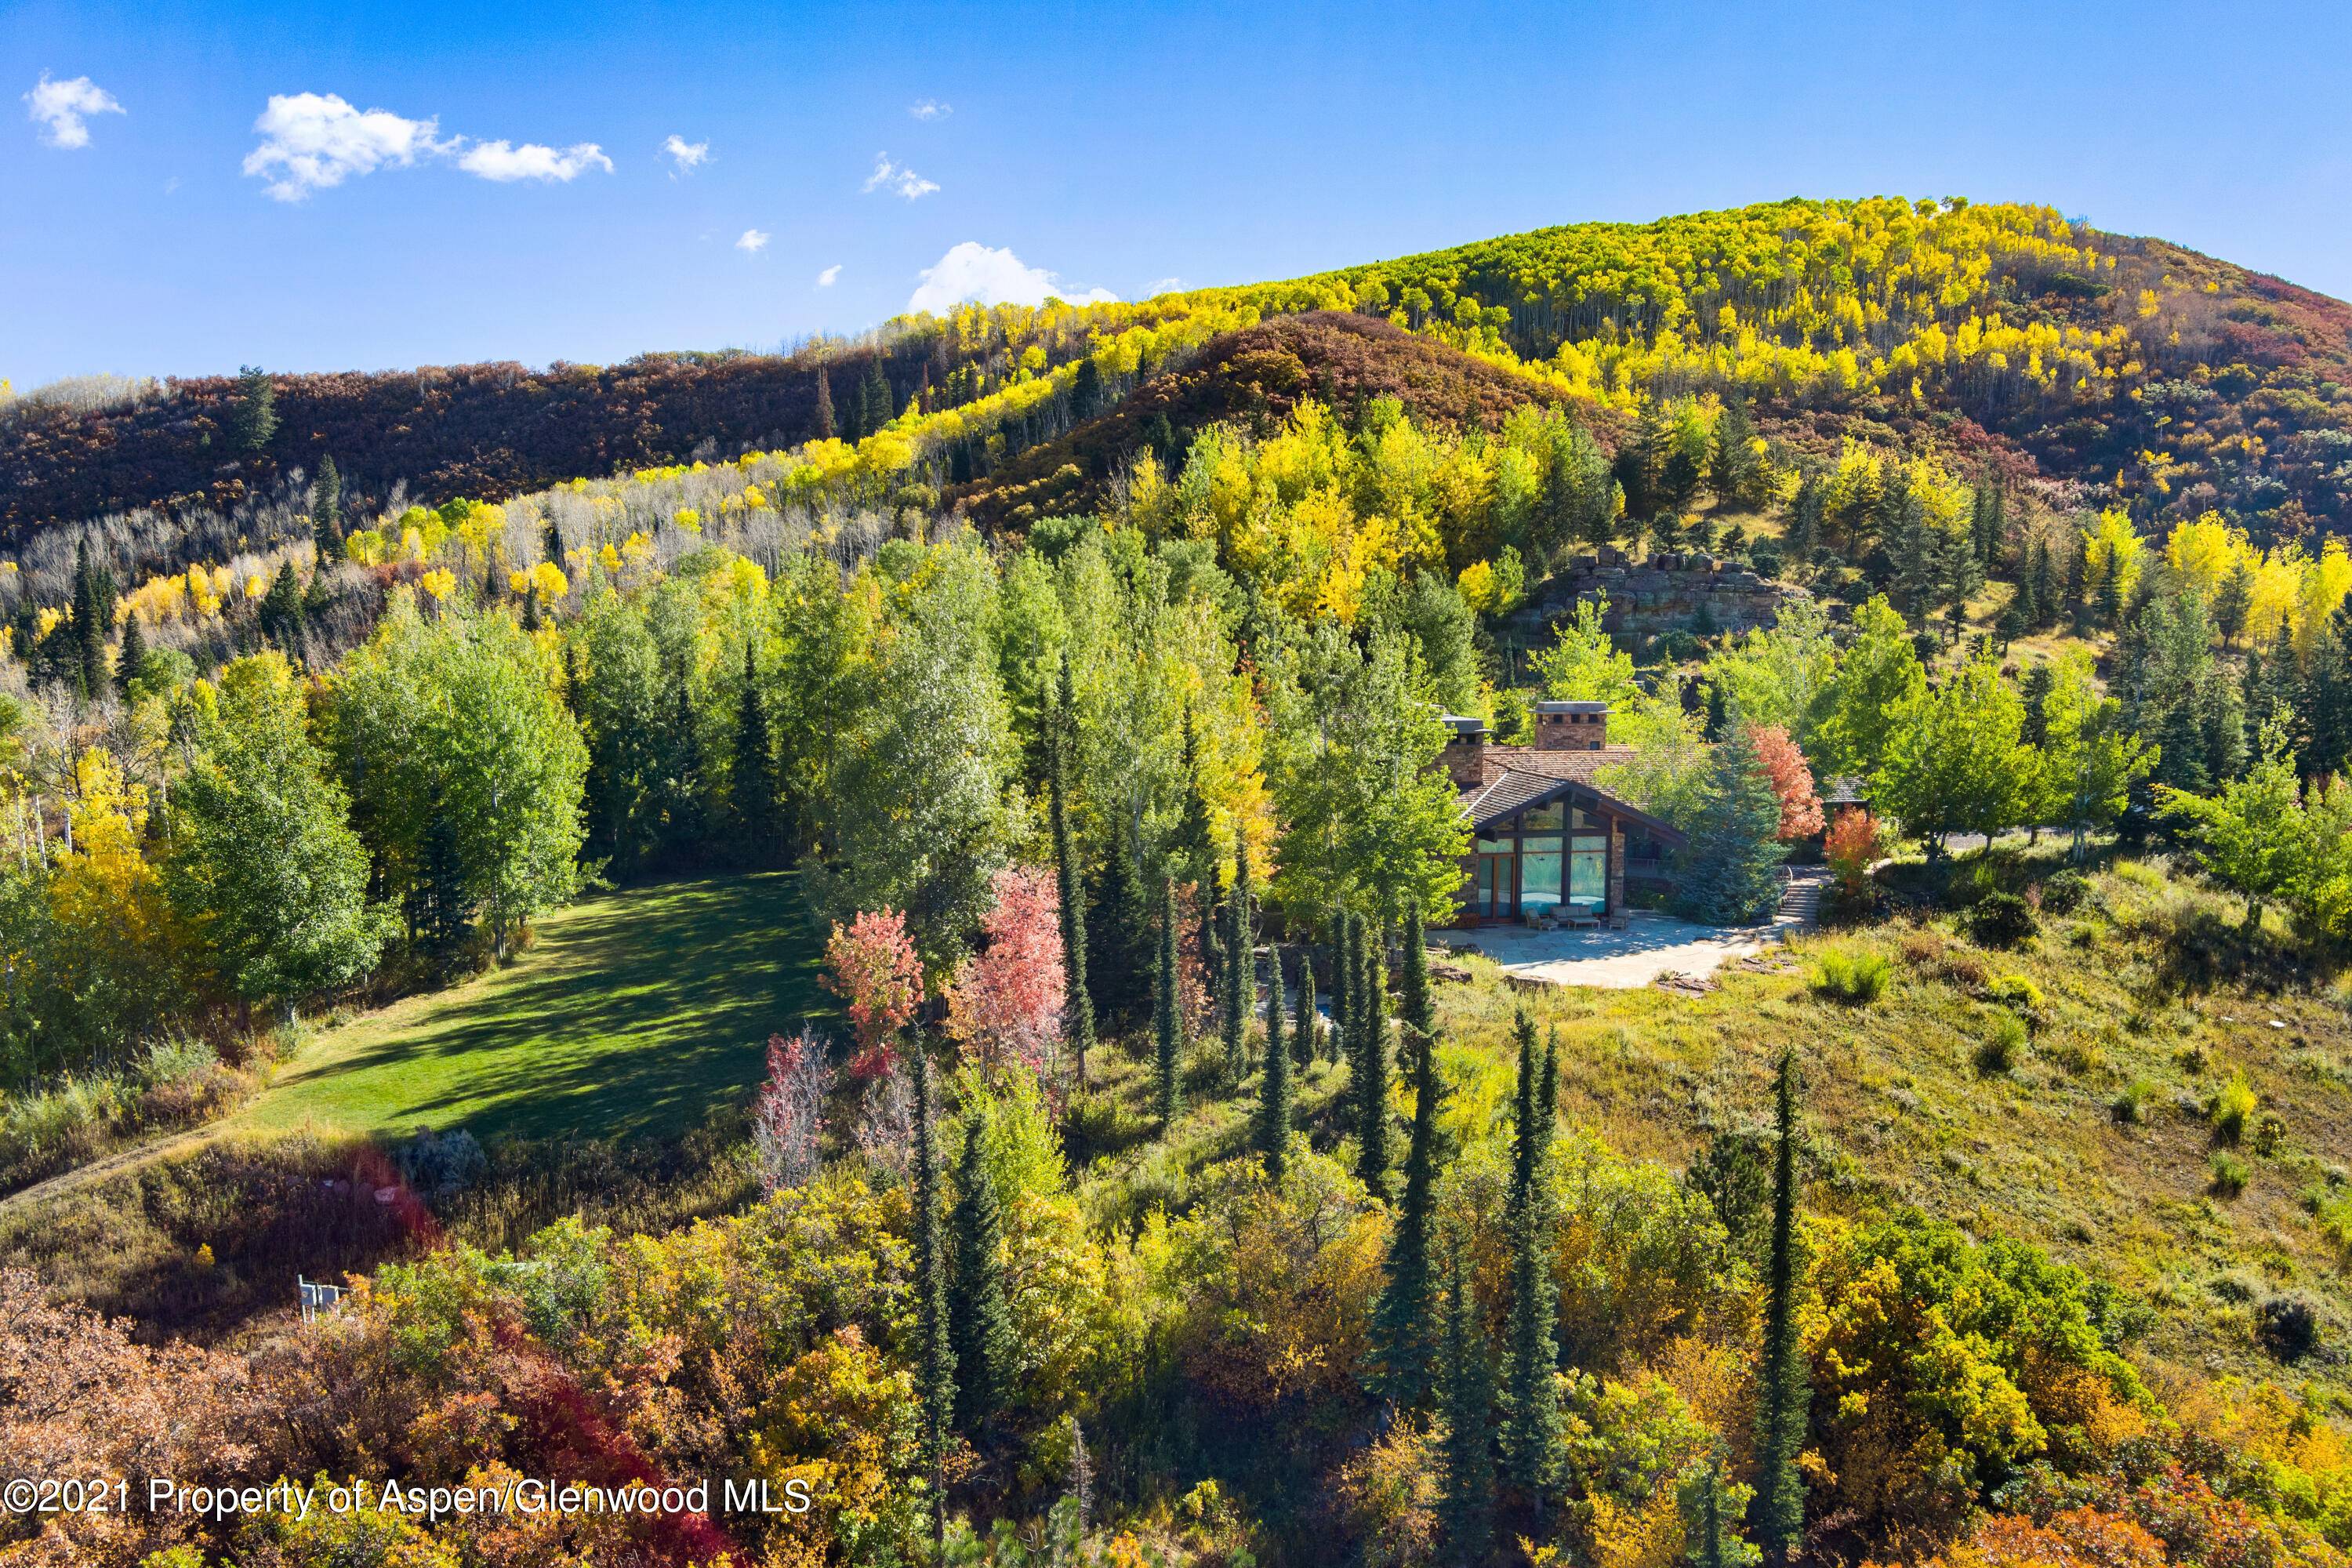 There's a reason Starwood founder Edgar Stern chose 1020 Carroll Drive ; it is simply the finest Aspen estate.